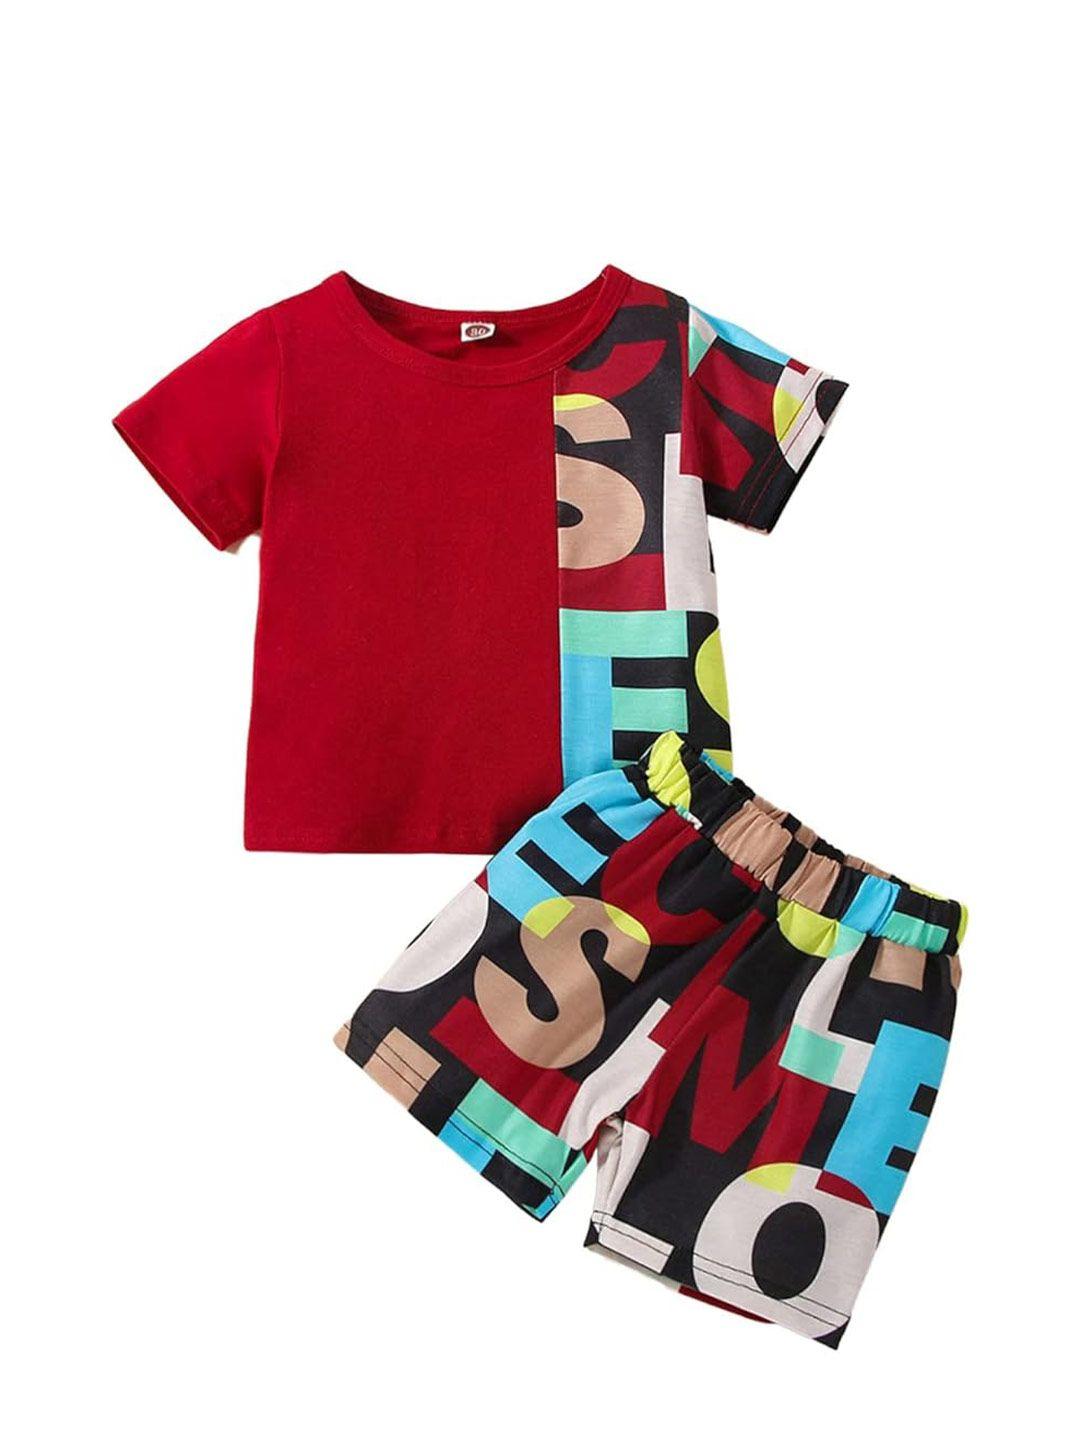 baesd unisex kids red & multicoloured printed t-shirt with shorts